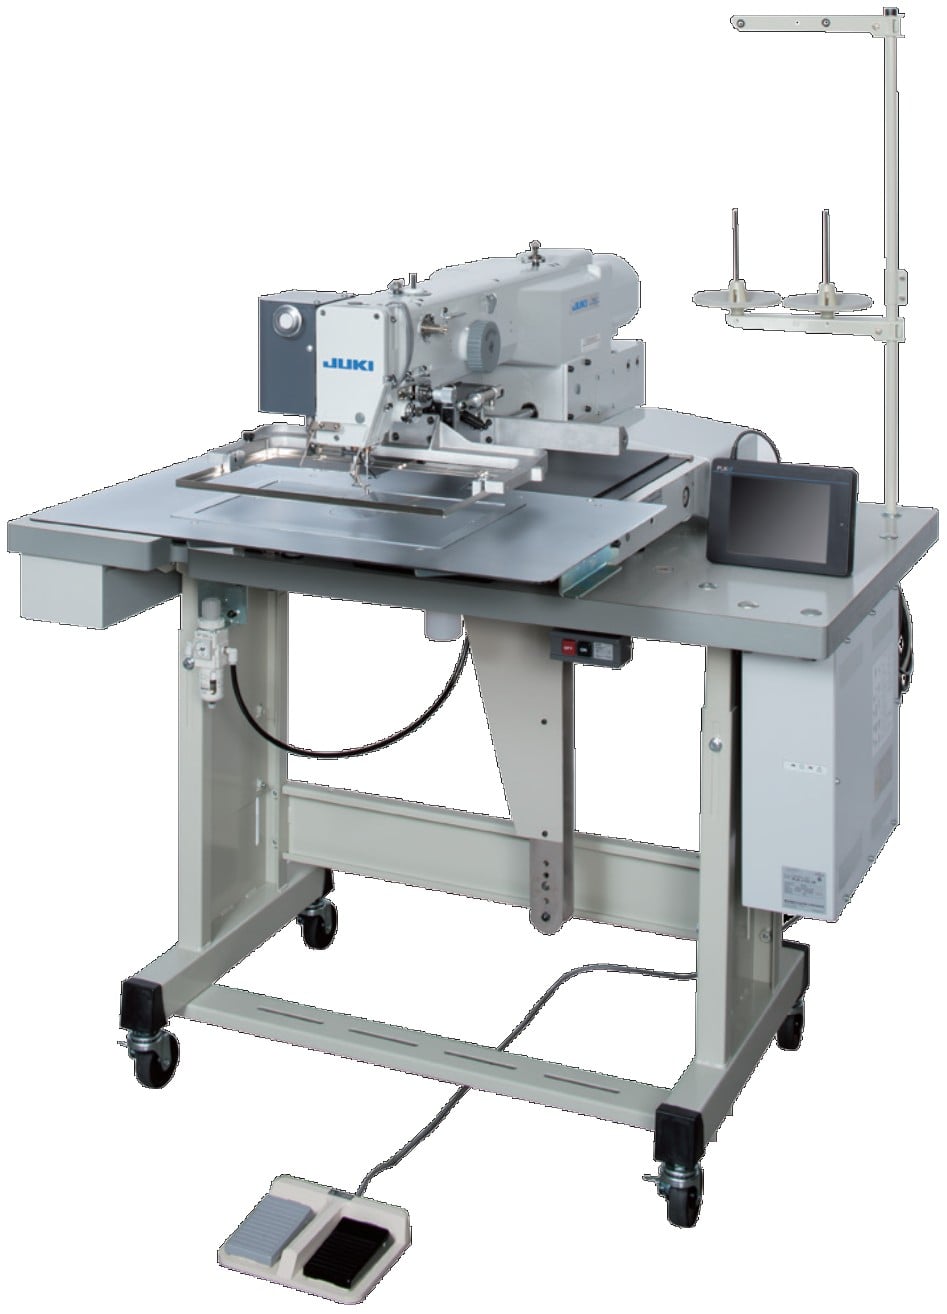 PROGRAMMABLE PATTERN SEWING MACHINES.
SEWING AREA: 300MM X 200MM